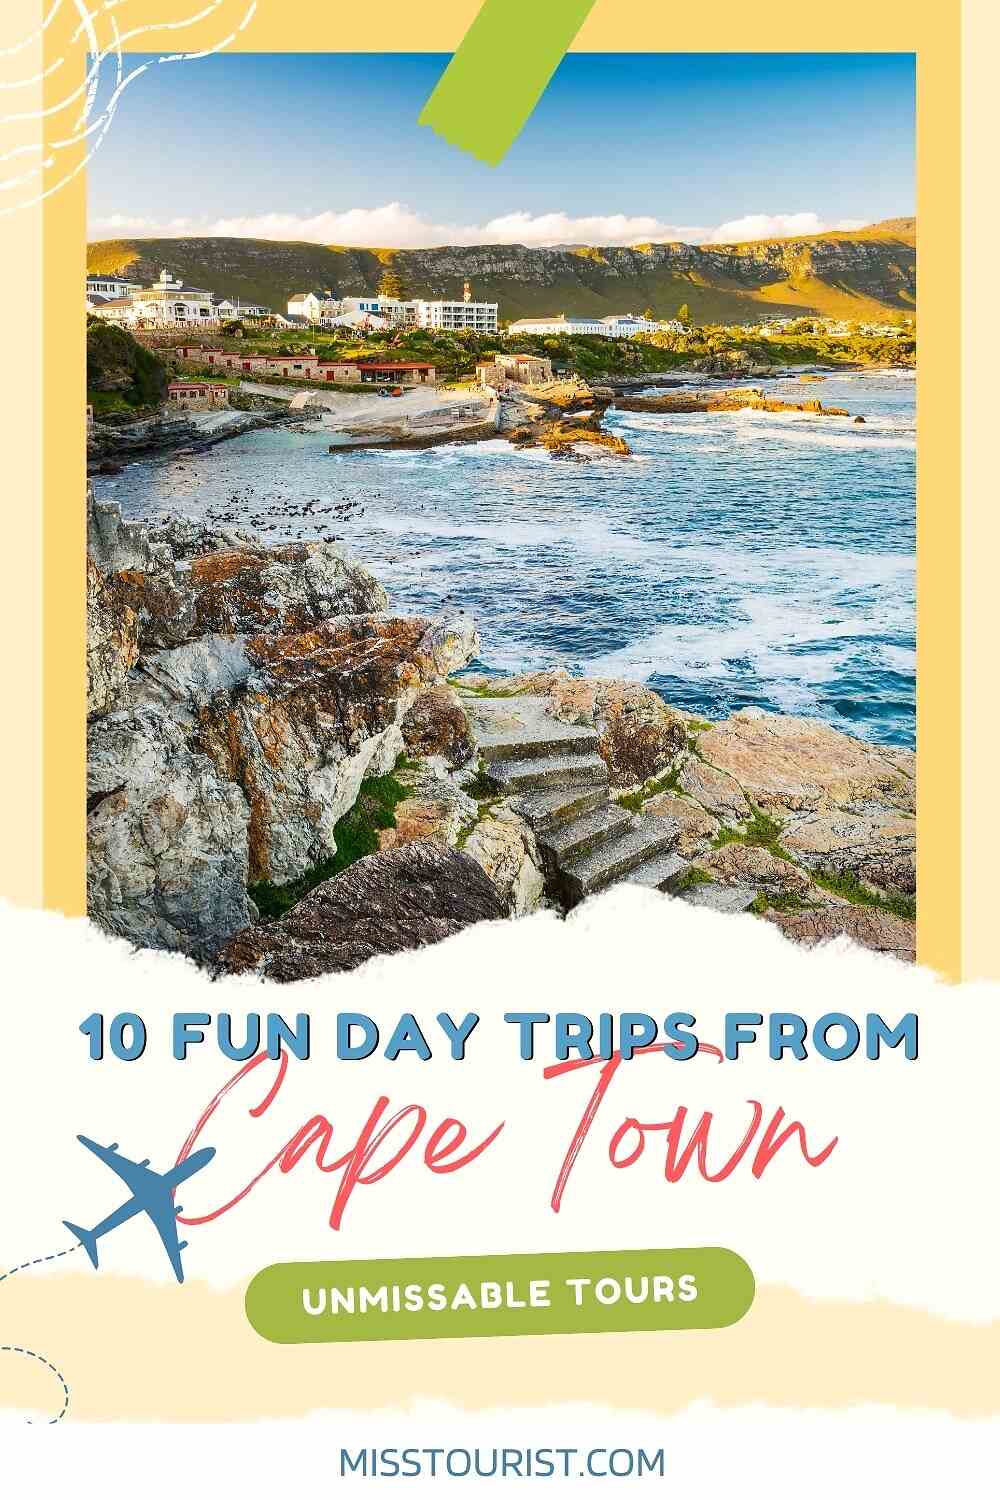 A scenic coastal landscape in Cape Town with the text "10 Fun Day Trips from Cape Town: Unmissable Tours" and a travel website link at the bottom.